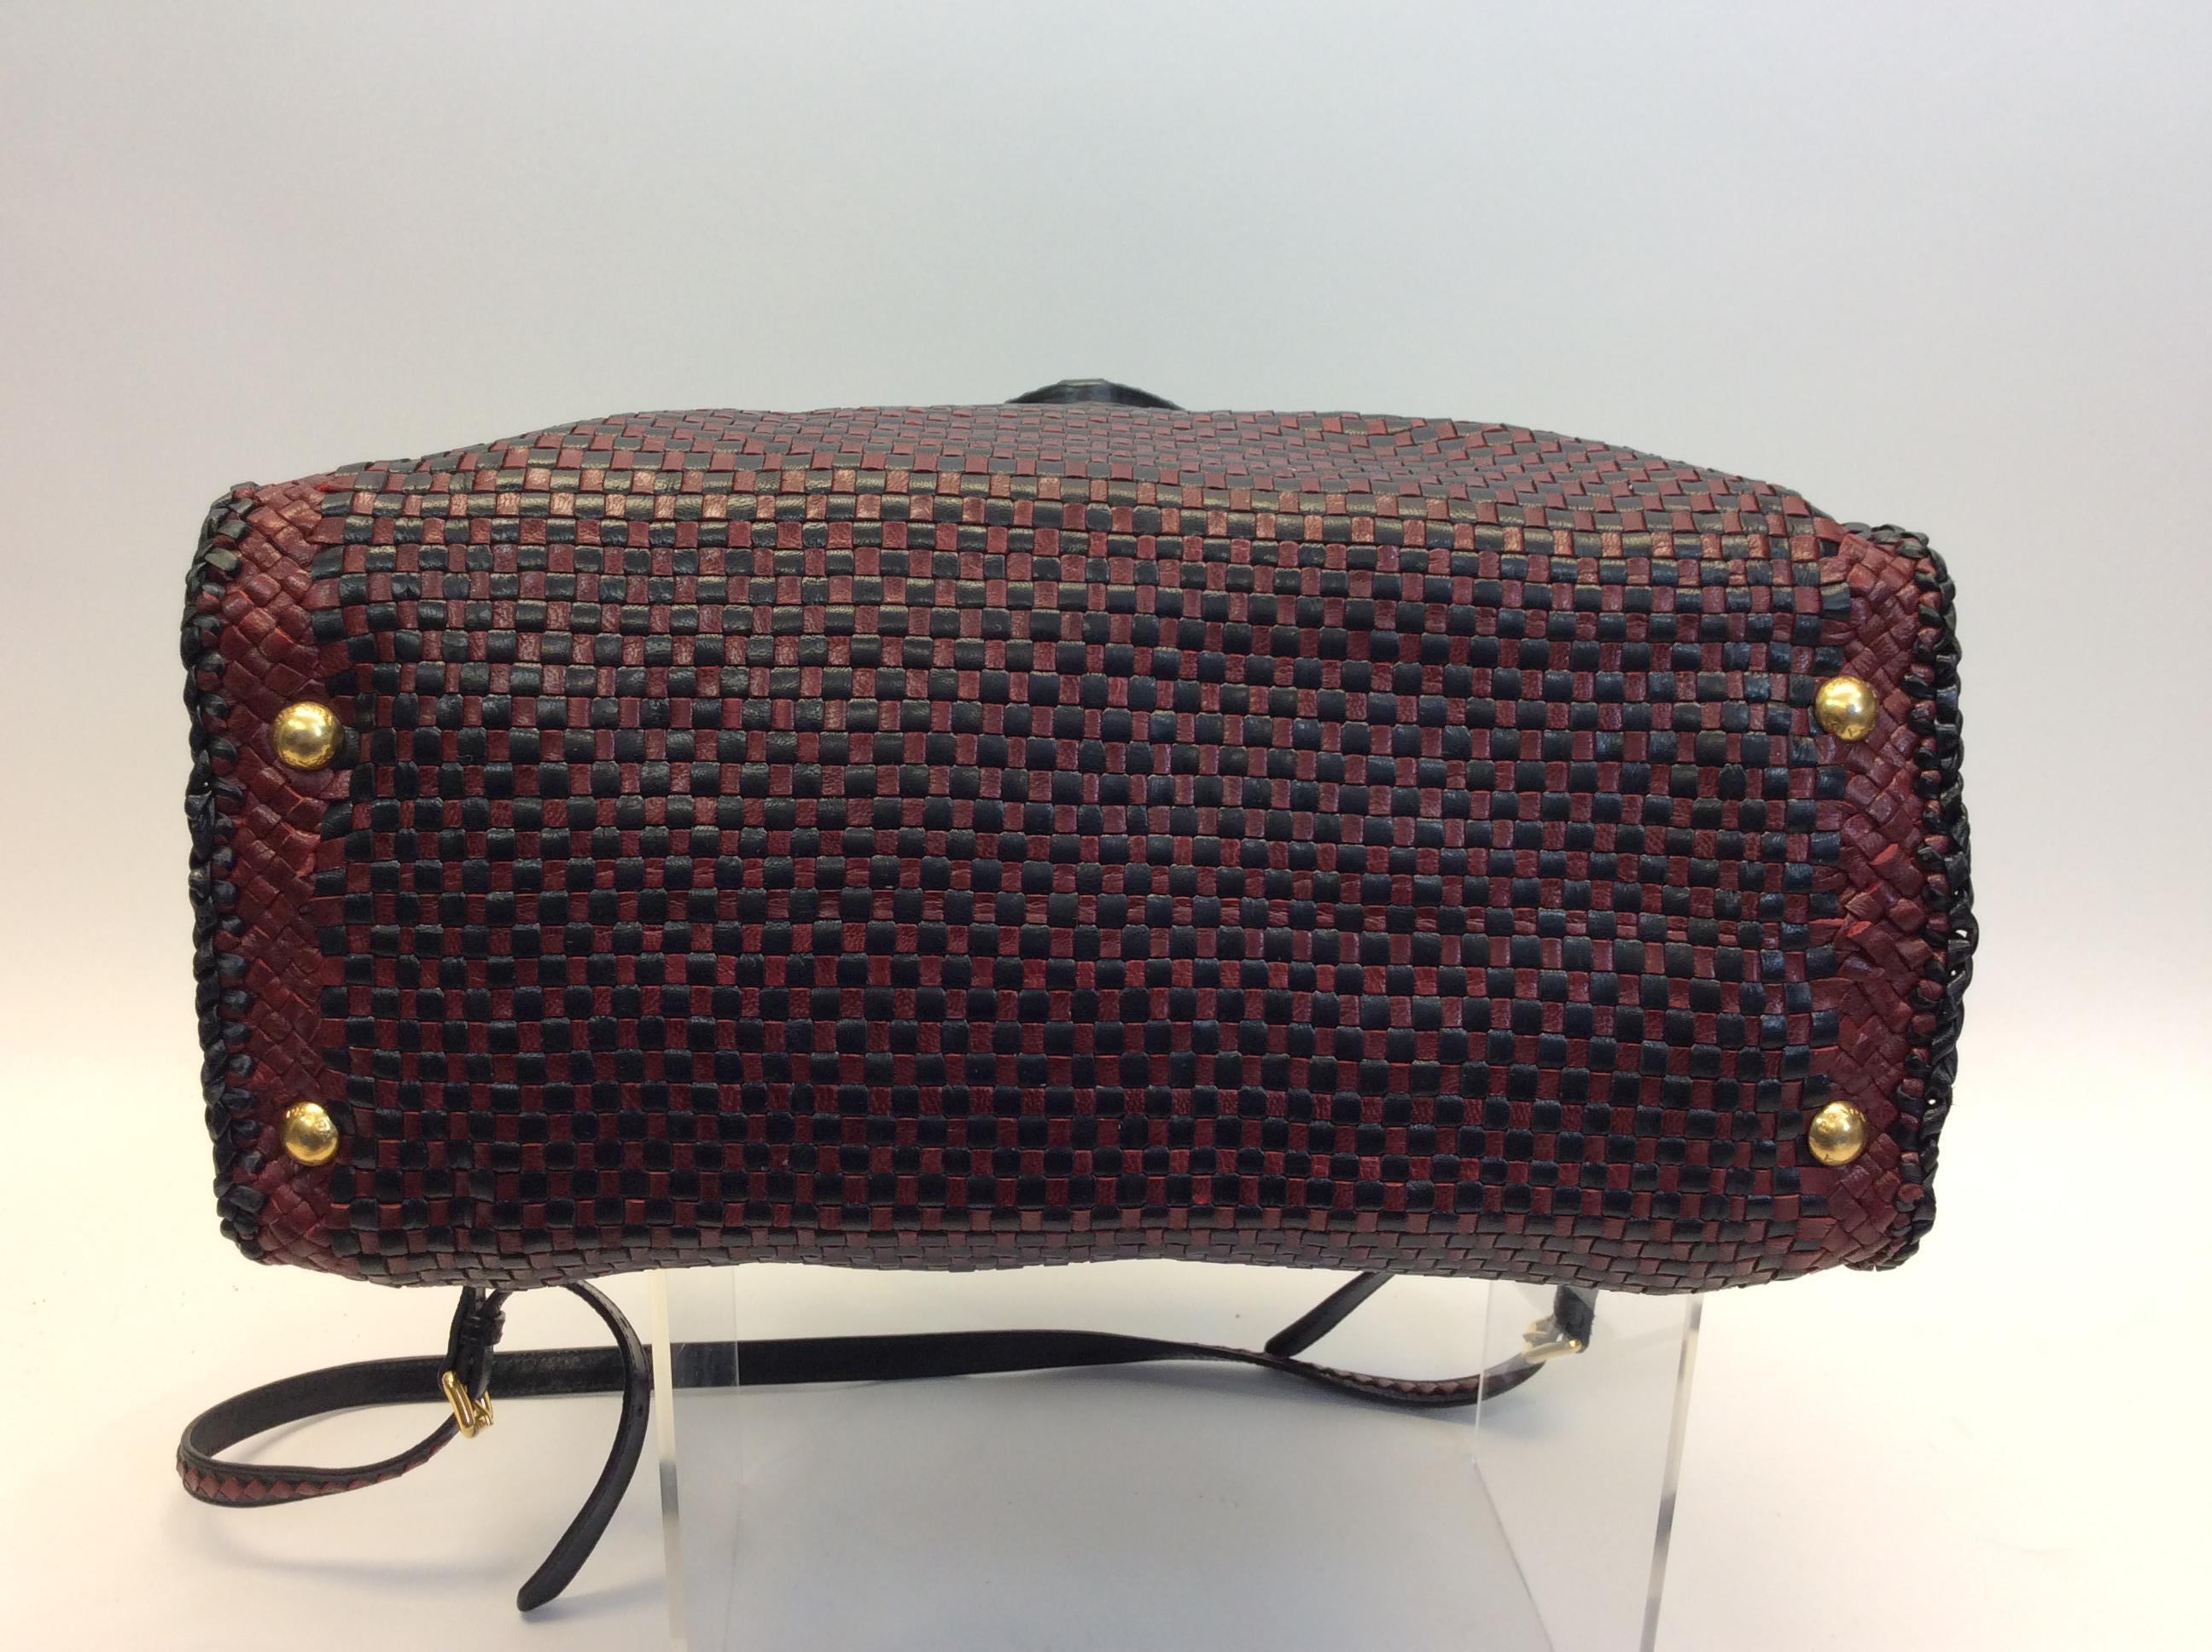 Prada Black and Red Woven Leather Satchel For Sale 1